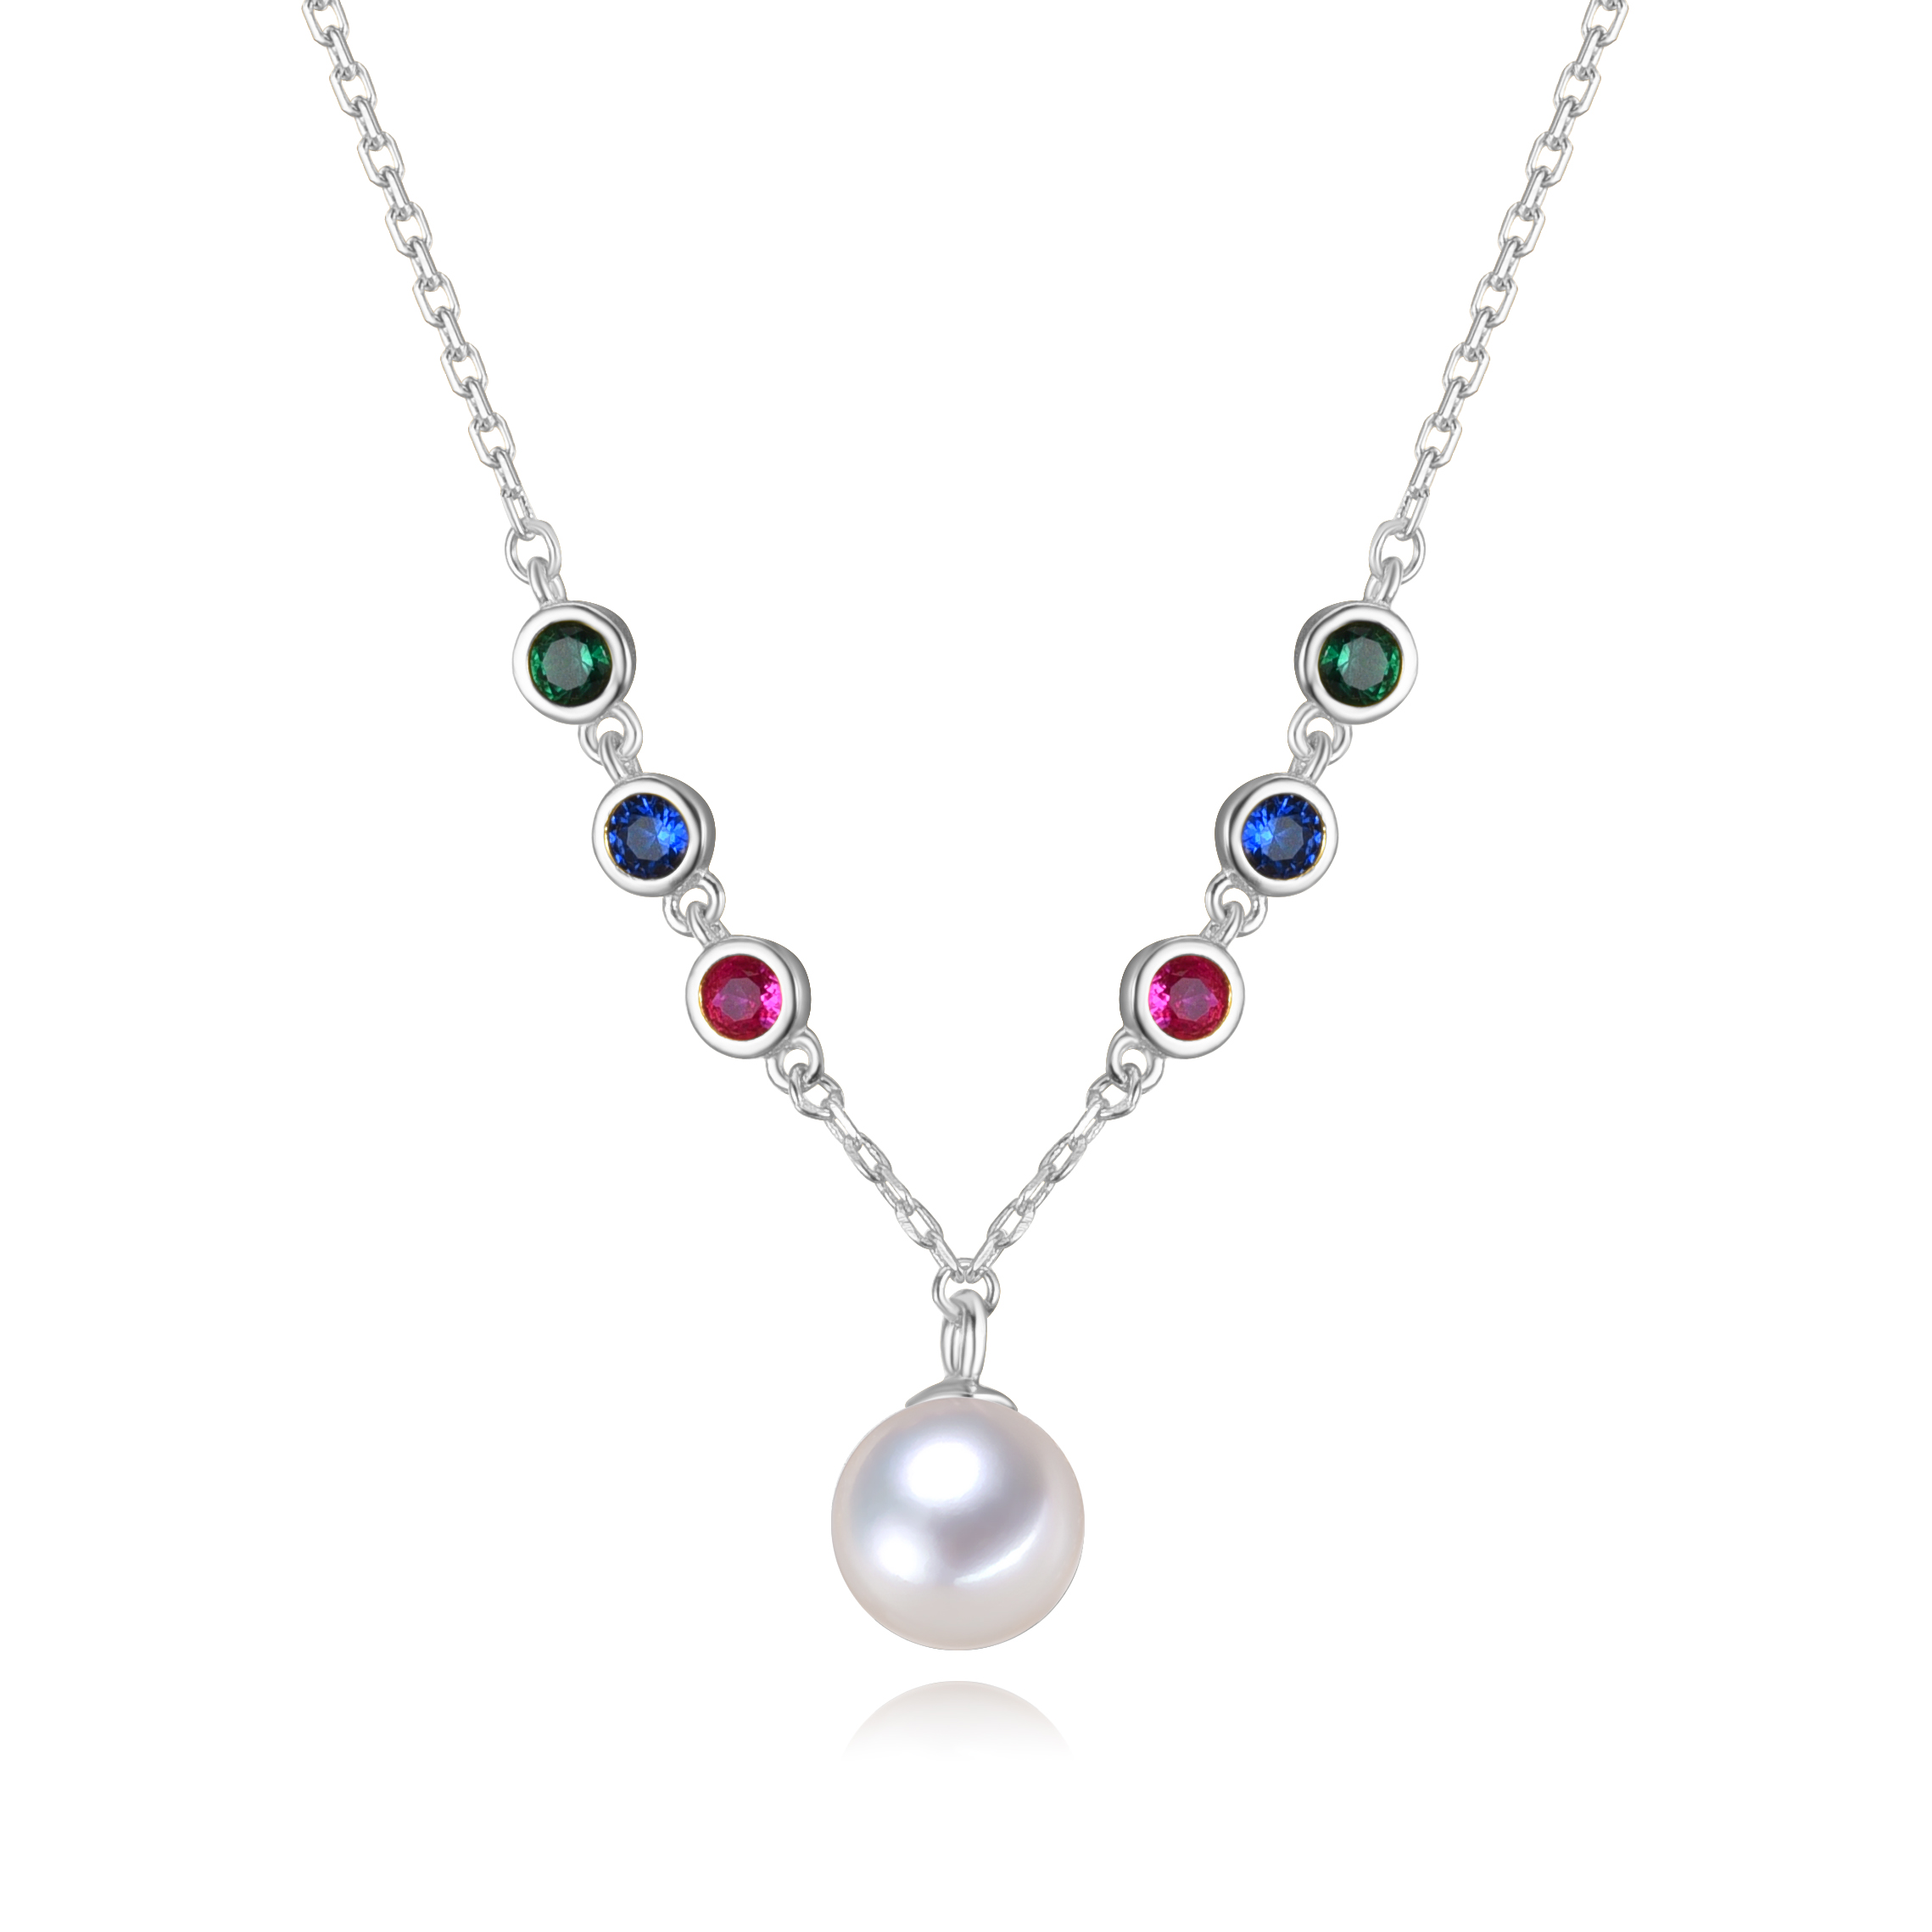 7.5-8mm round 925 silver real freshwater pearl pendant